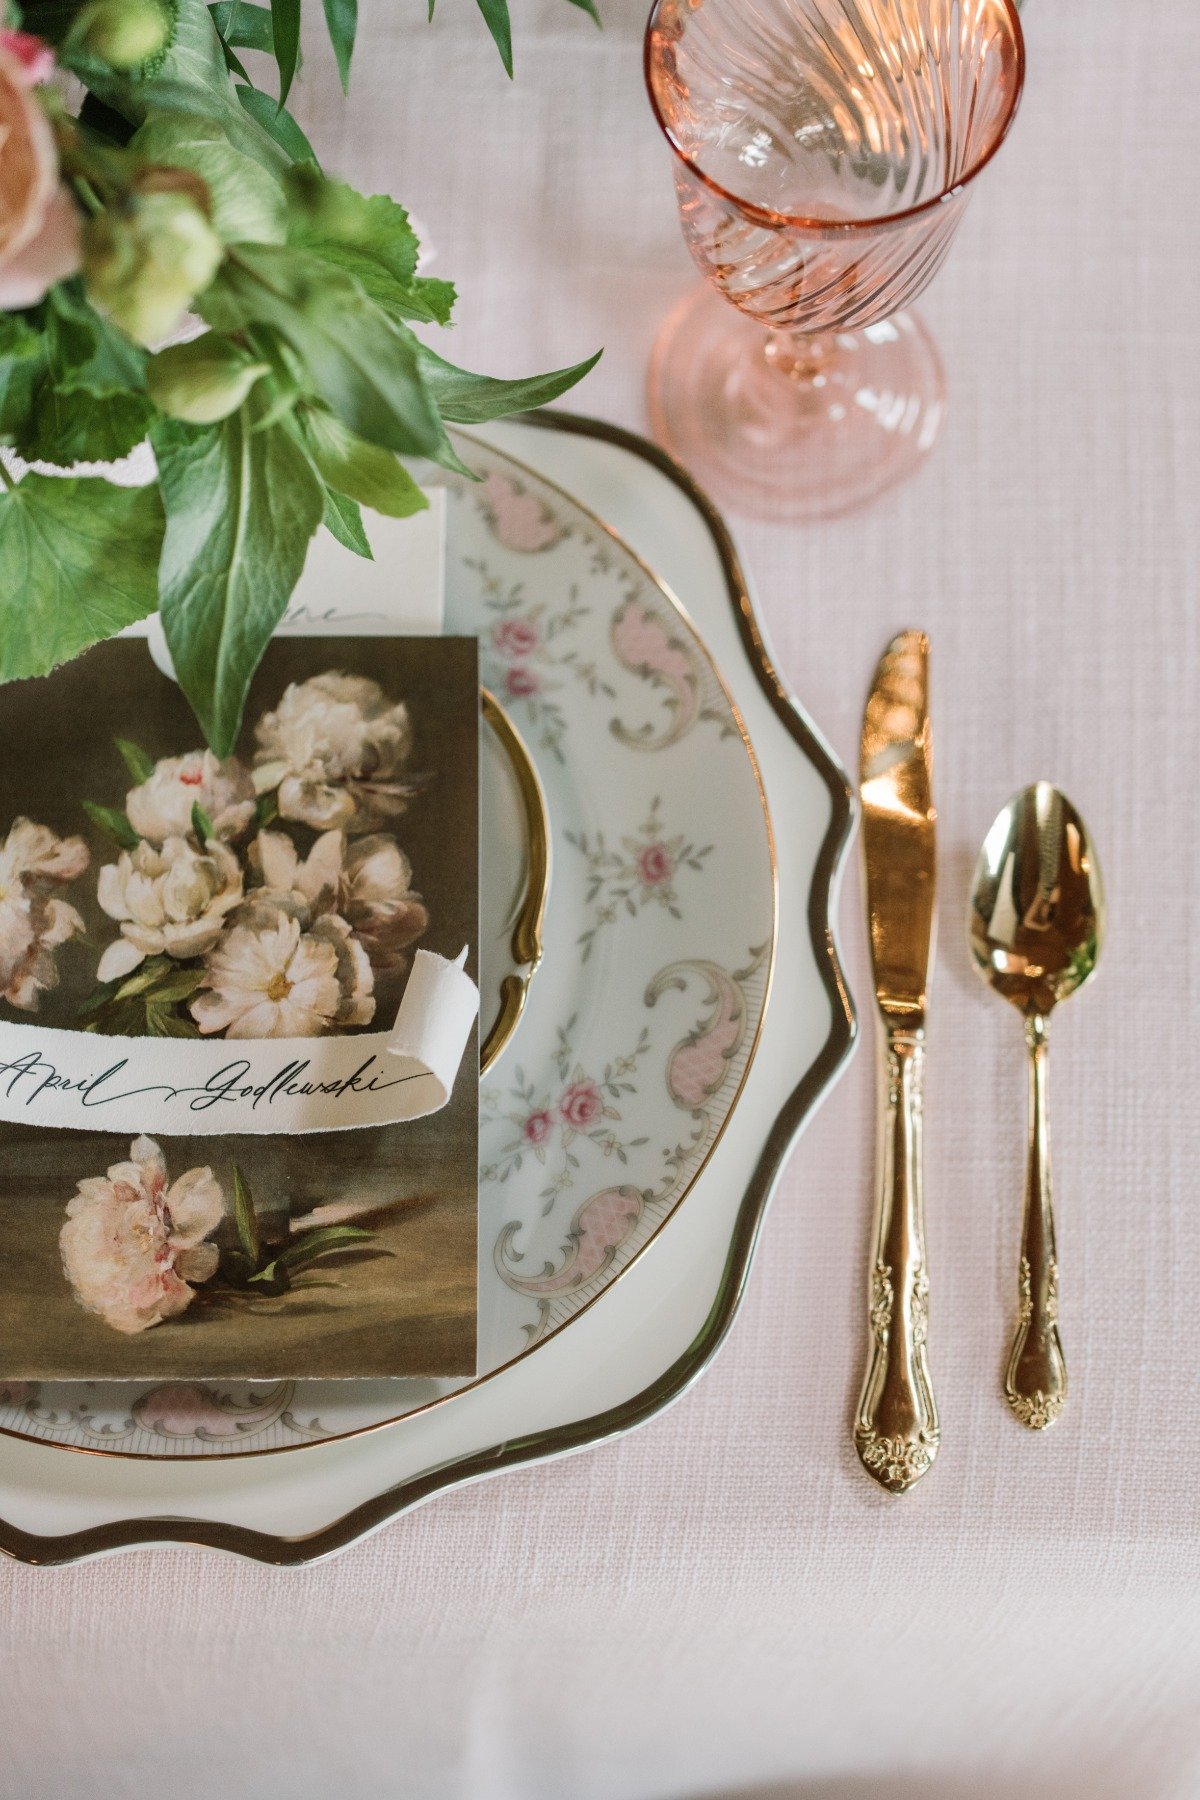 10 Wedding Things You May Hesitate Spending Money On (But Will Be Glad You Did!)